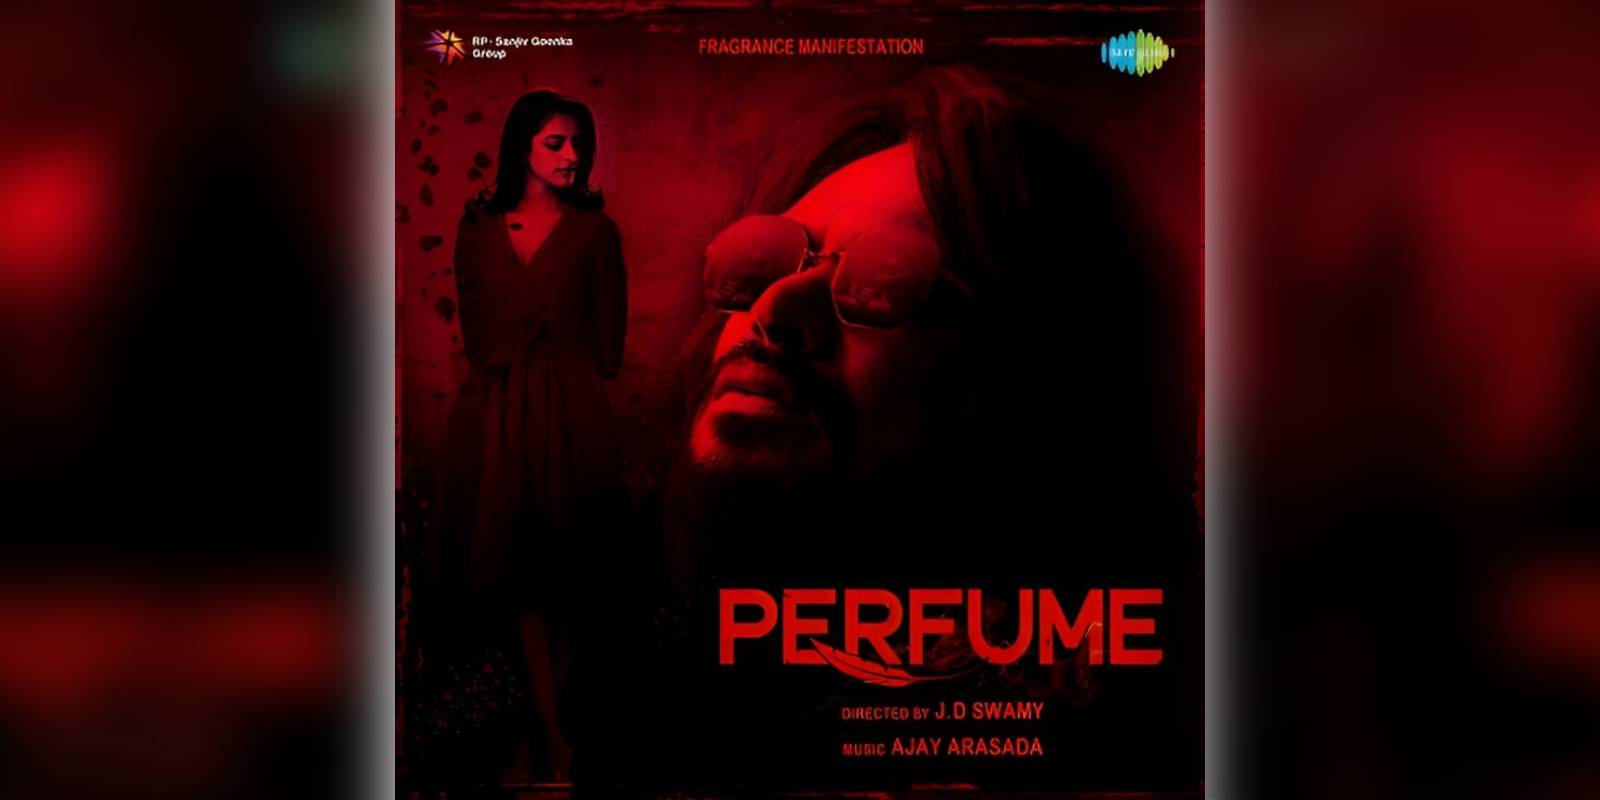 A poster of the film Perfume